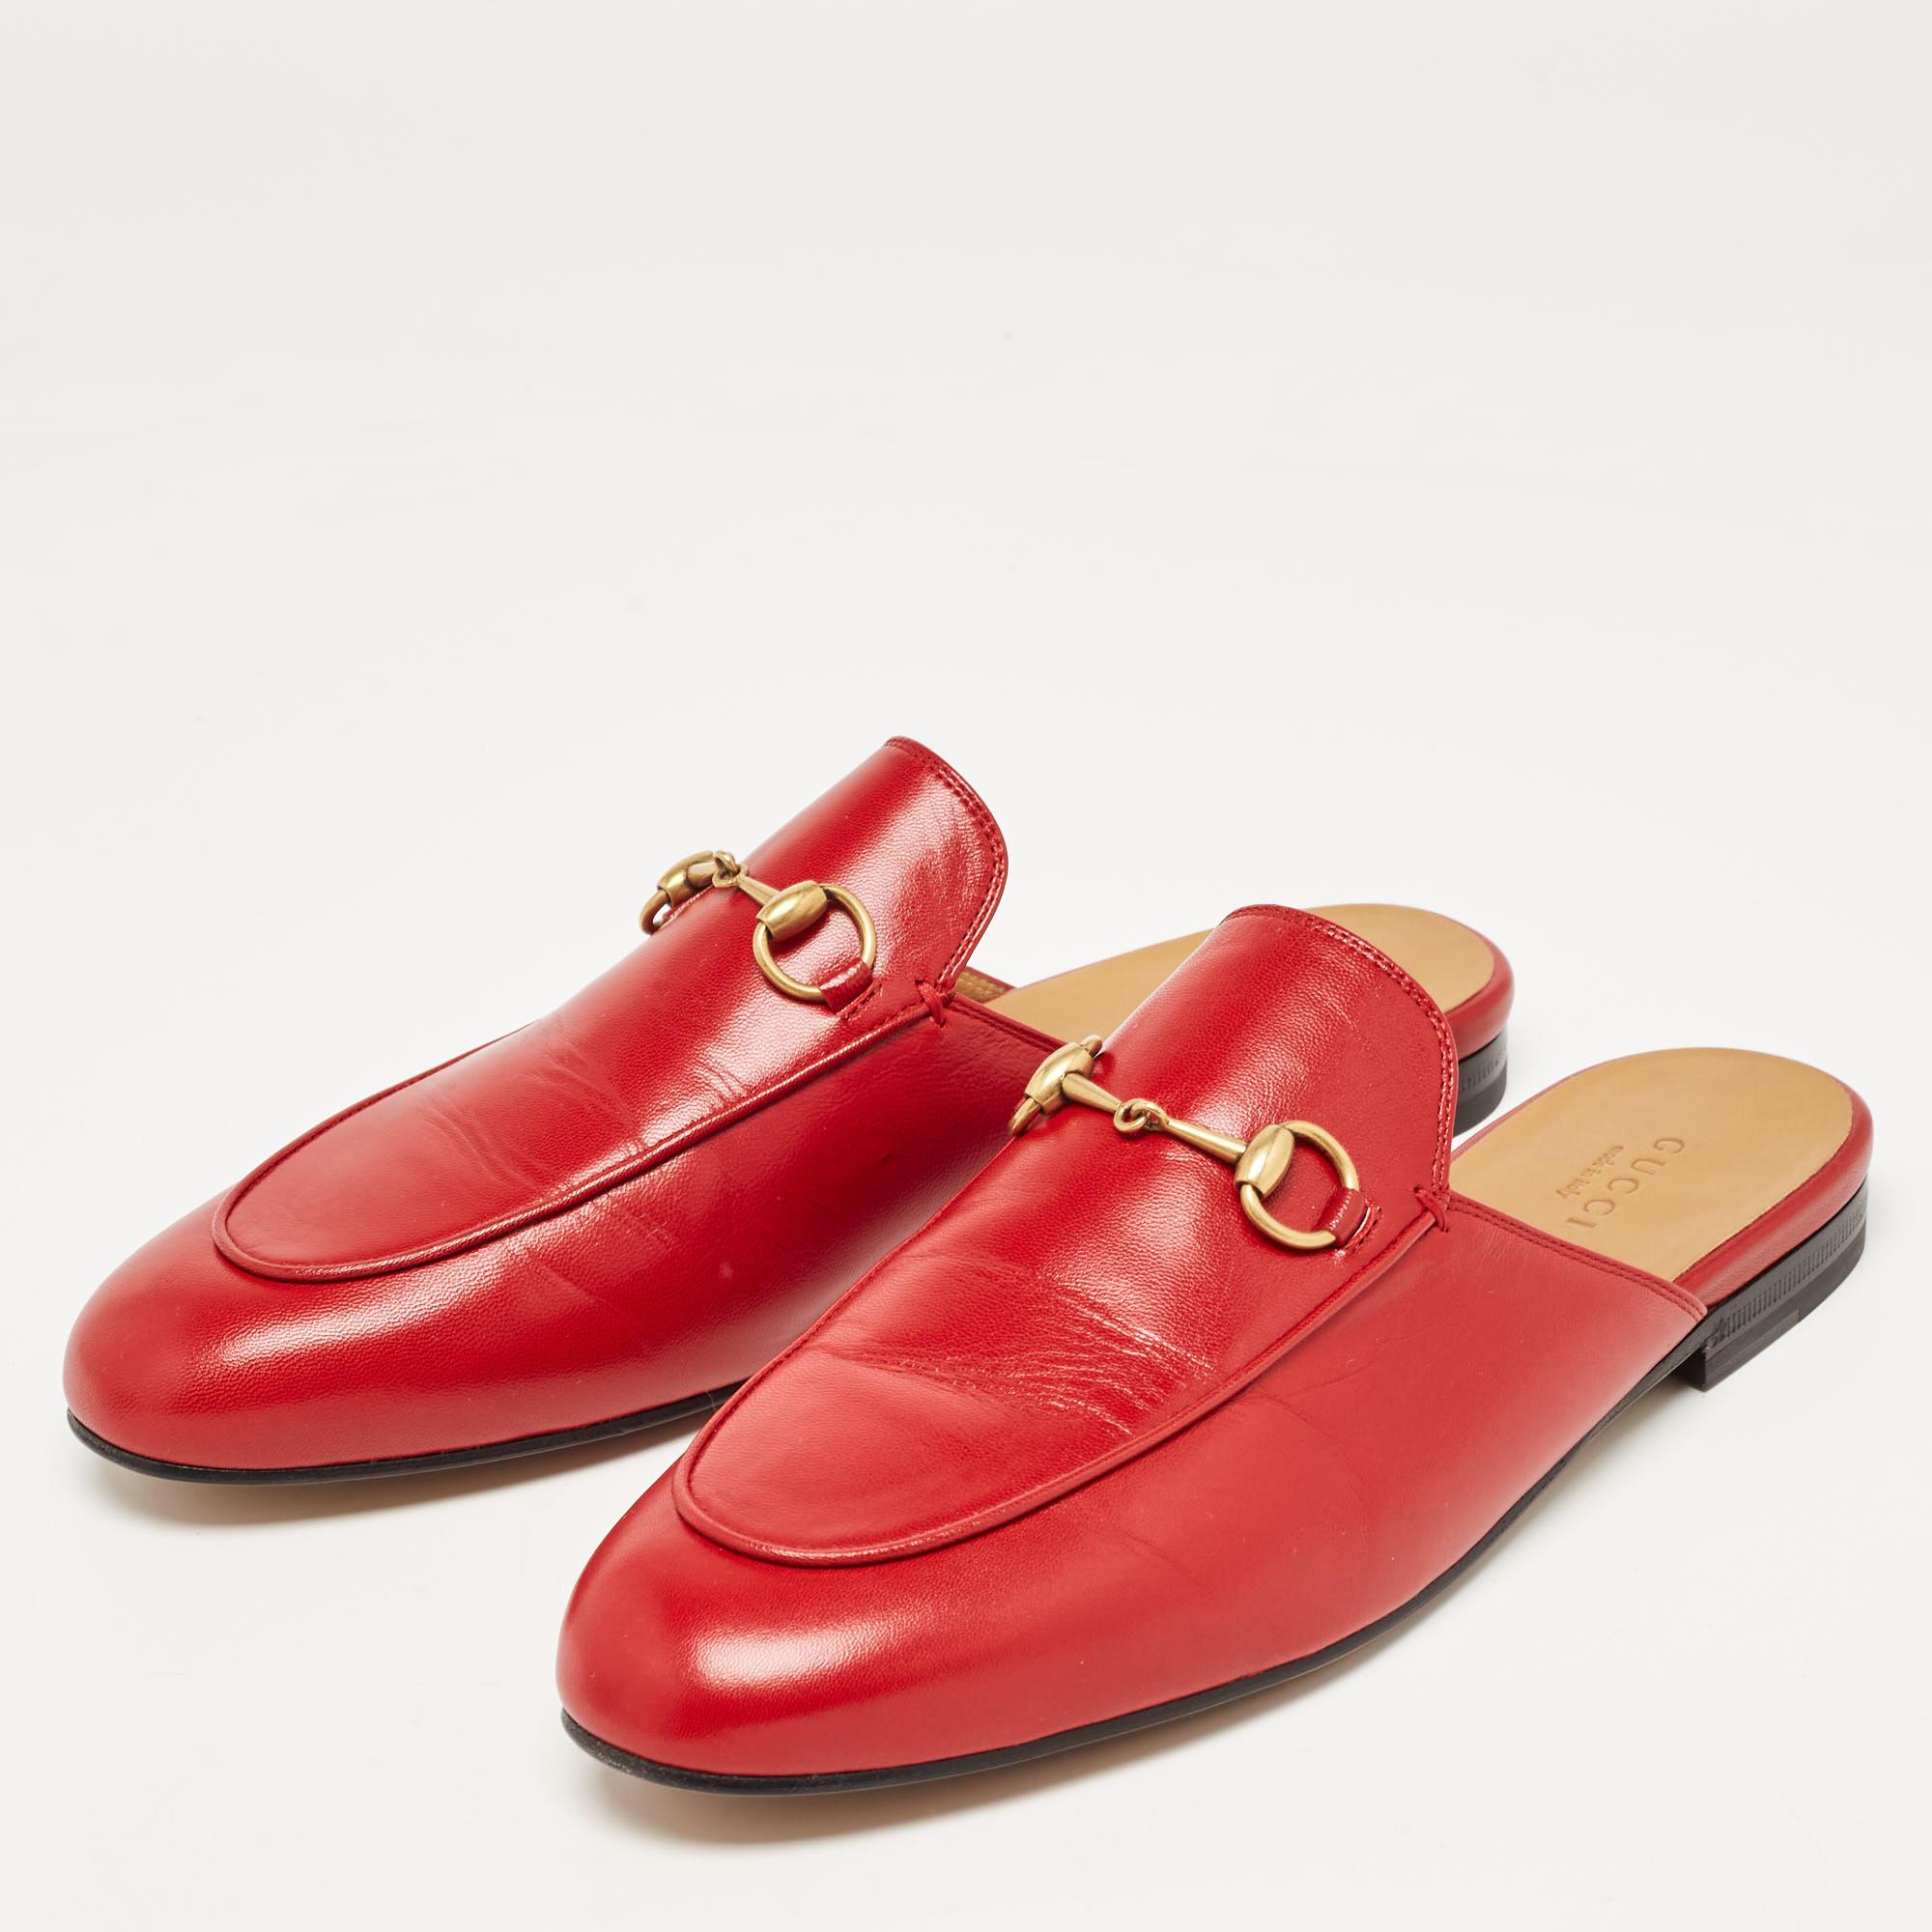 Gucci Red Leather Princetown Flat Mules Size 38.5 2